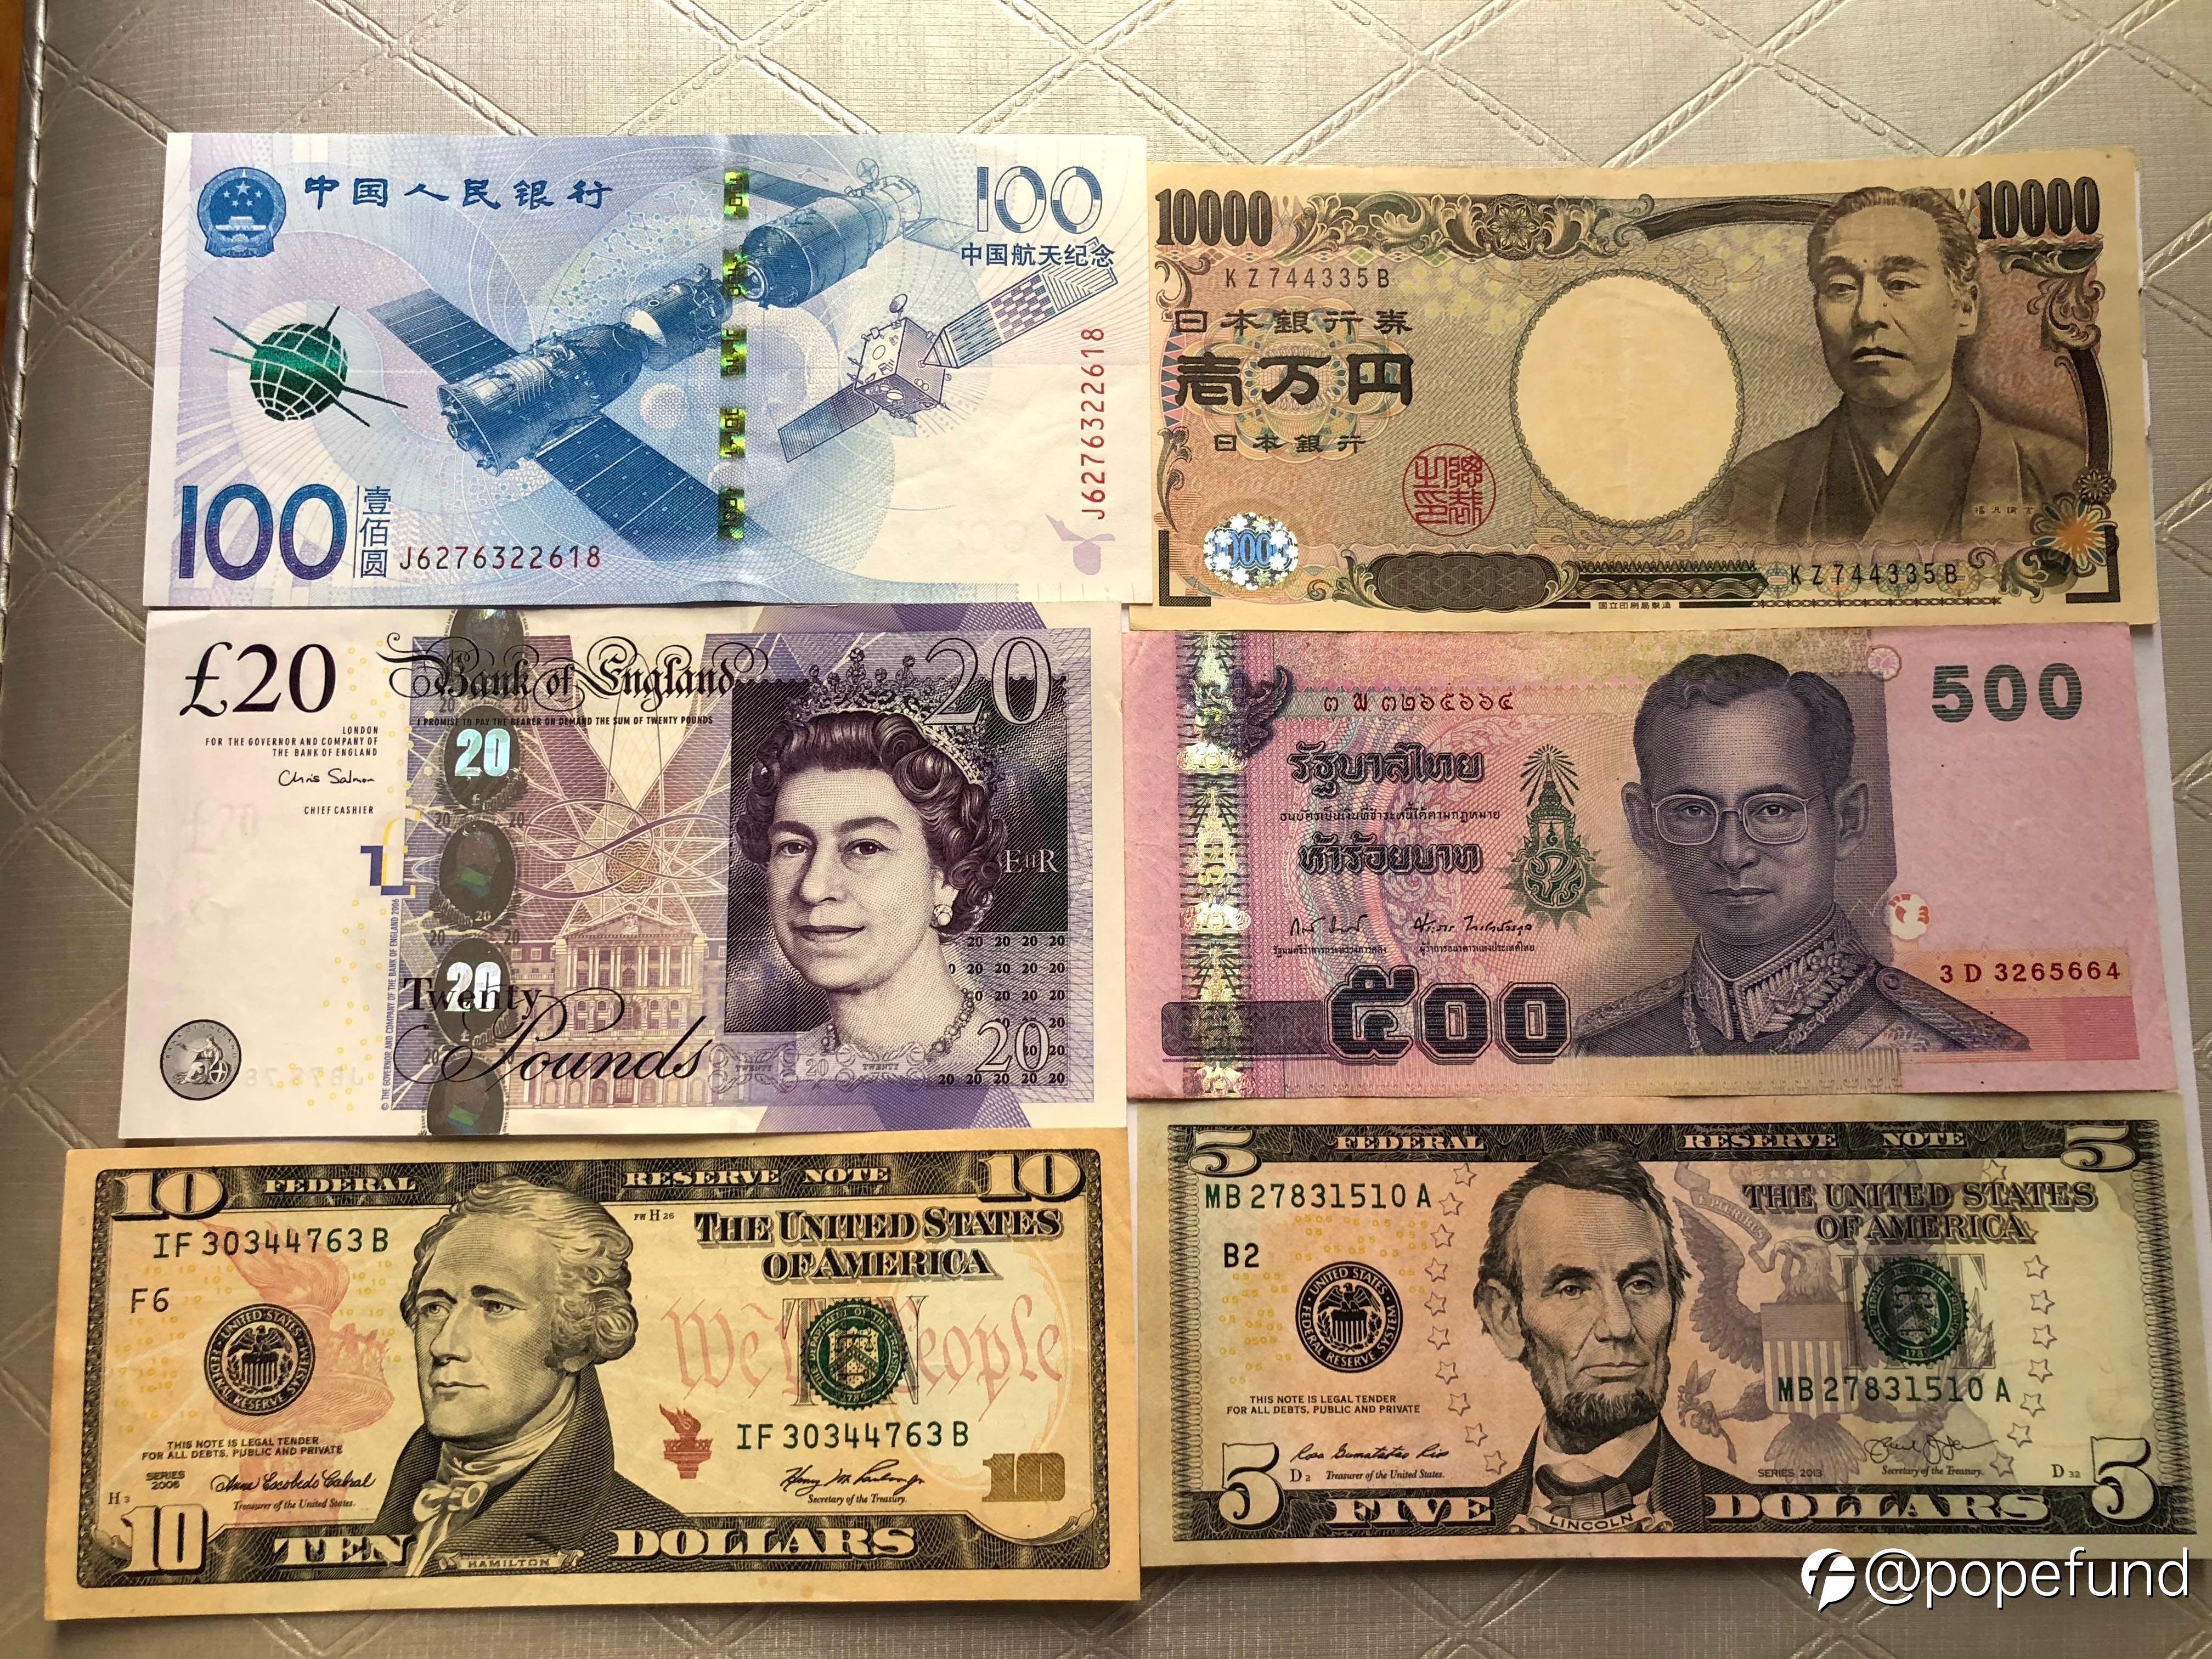 They are much more interesting than just trading: beautiful ,commemorative and artistic bank notes